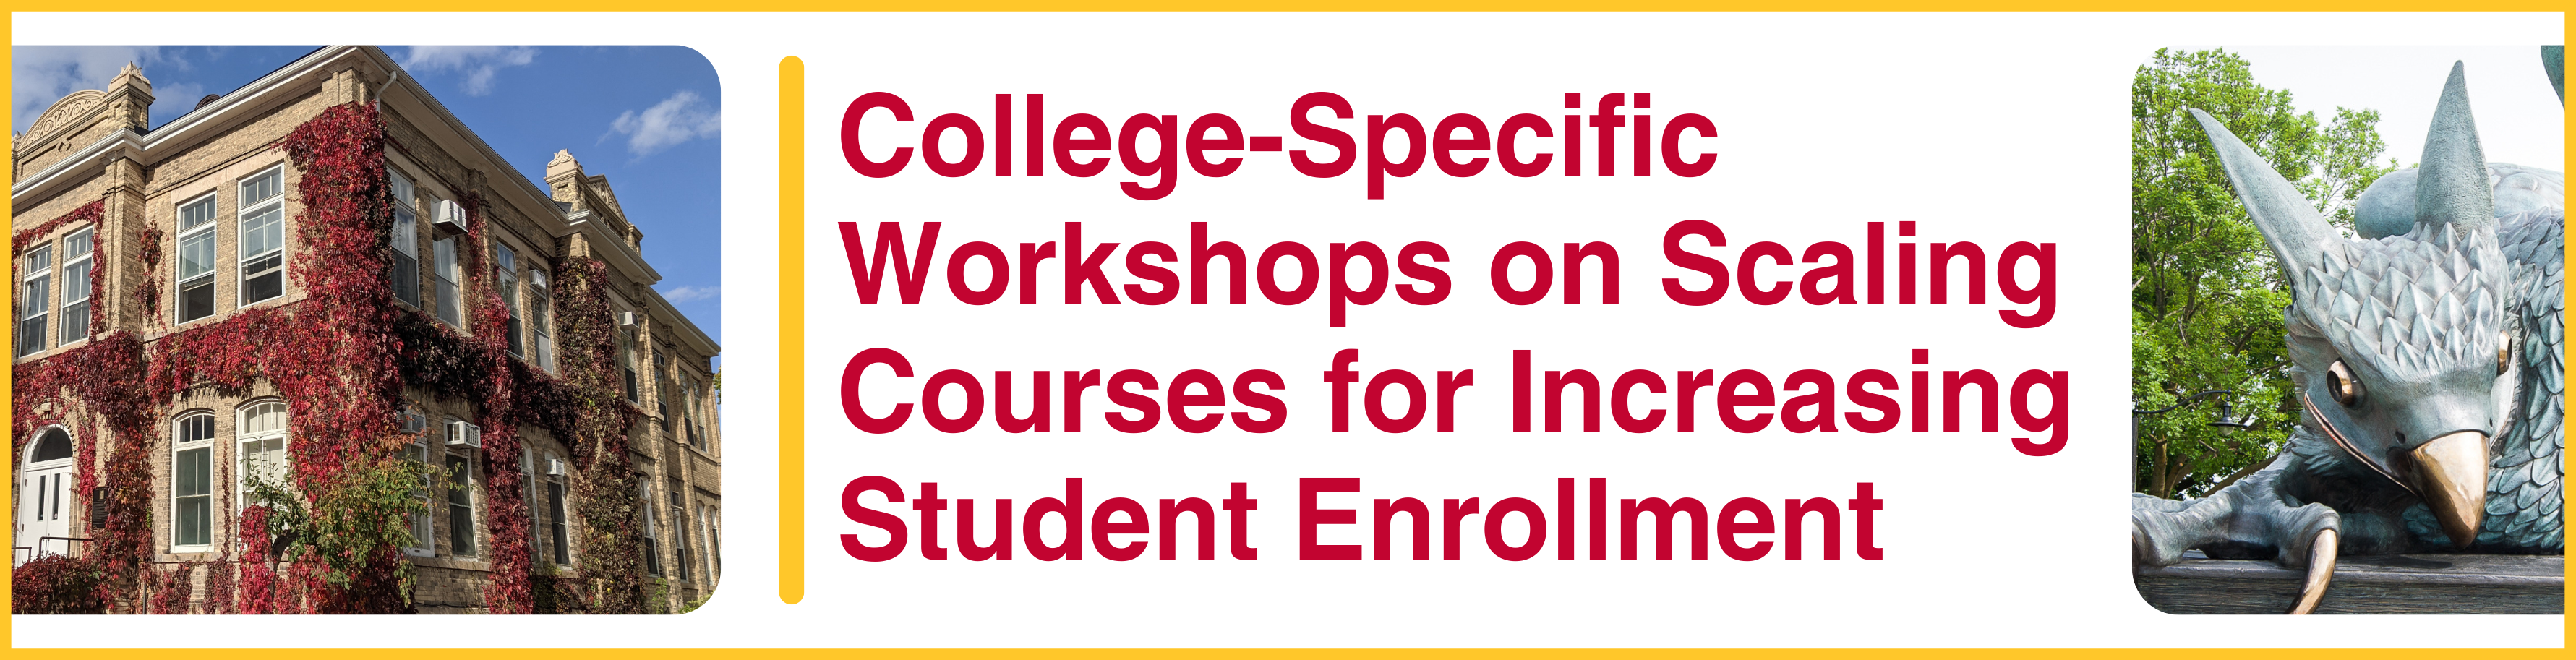 College-Specific Workshops on Scaling Courses for Increasing Student Enrollment